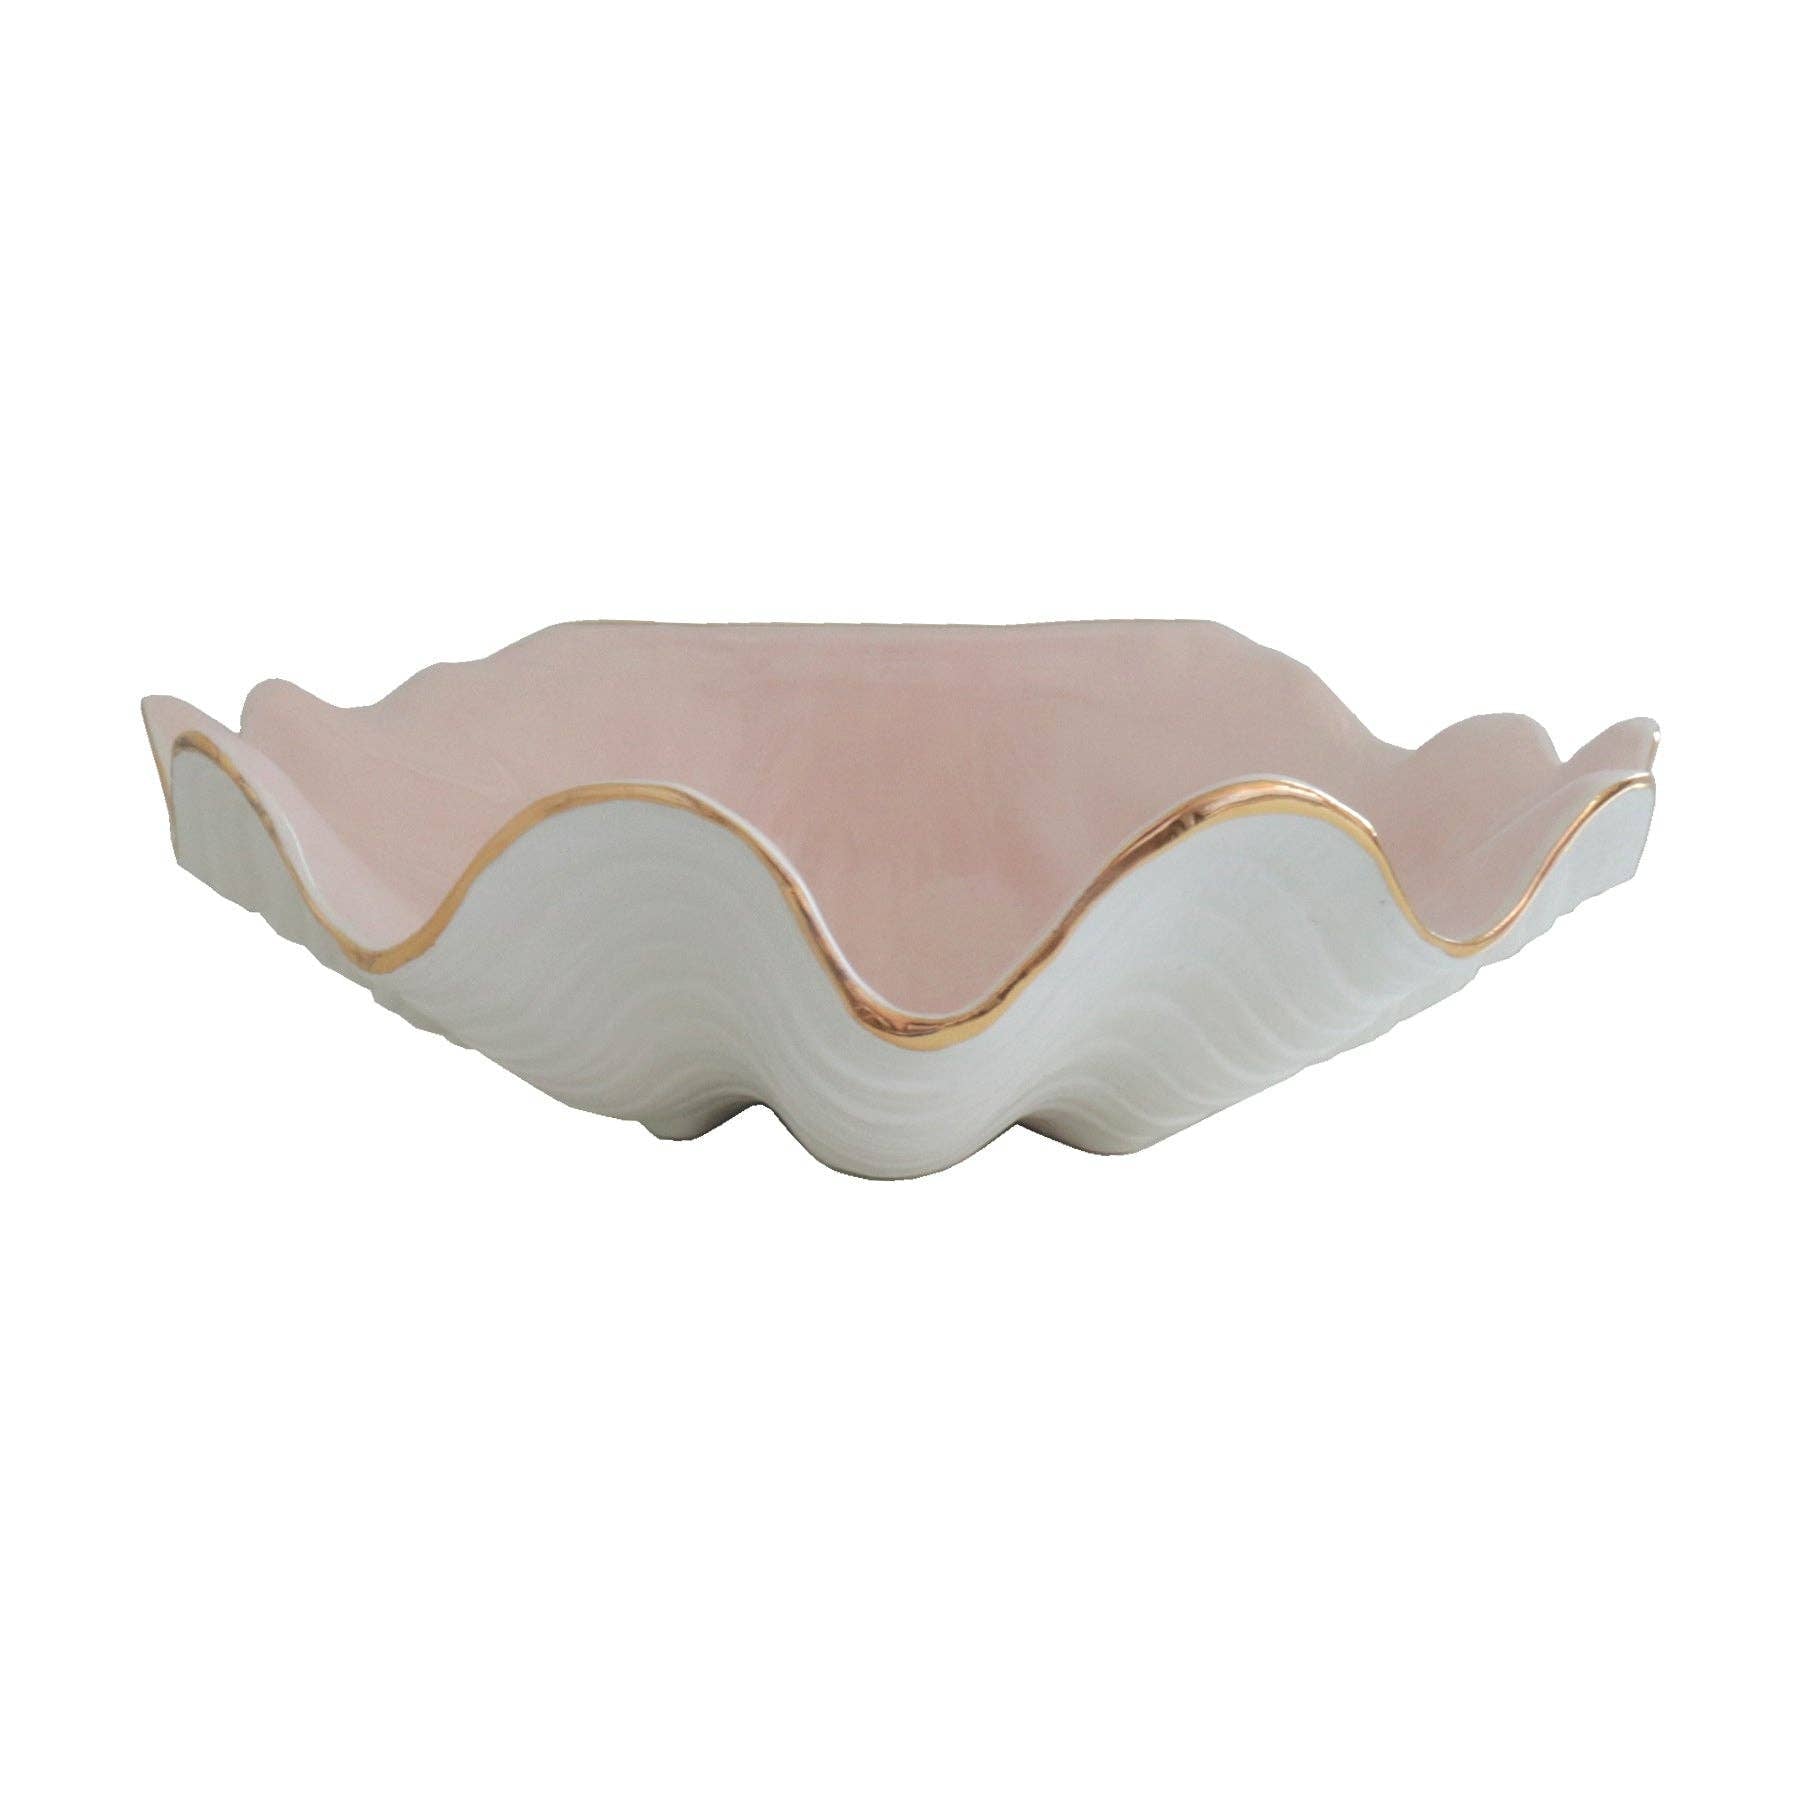 Lo Home by Lauren Haskell Designs Clam Shell Bowl with 22K Gold Accent: Small / Pink - Little Birdies